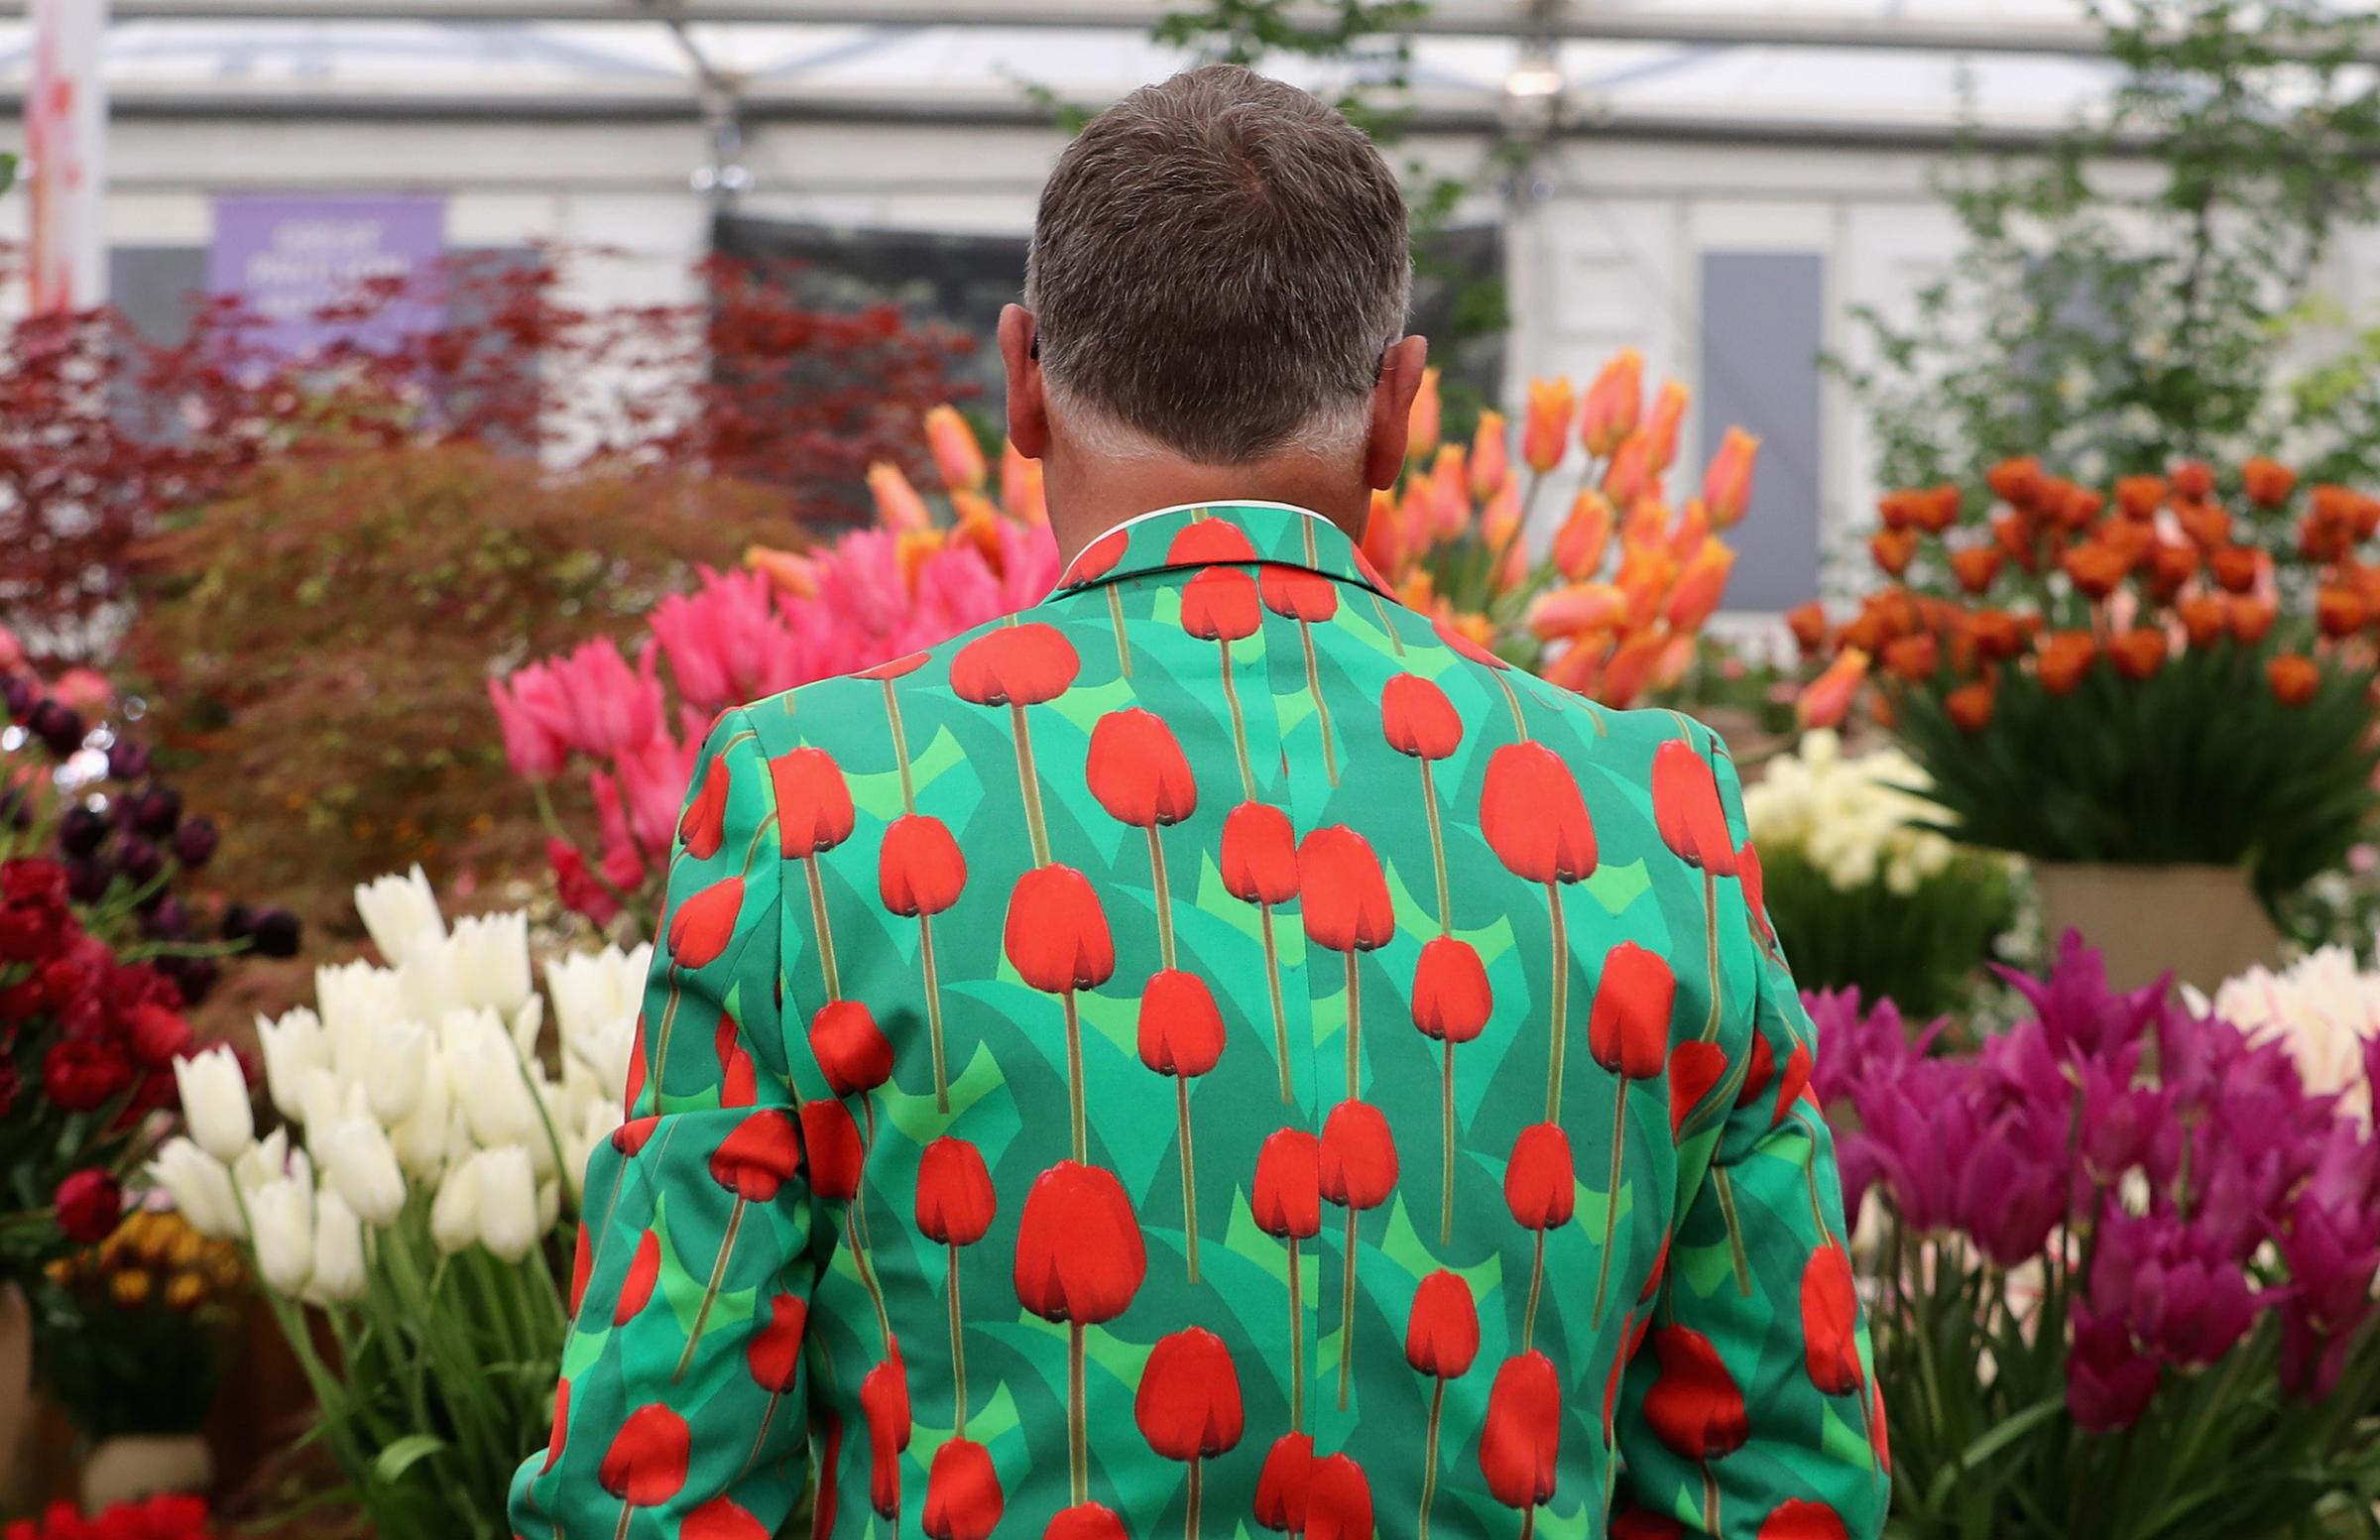 A man waters tulips in a tulip suit at the RHS at the Chelsea Flower Show in London on May 23, 2016.